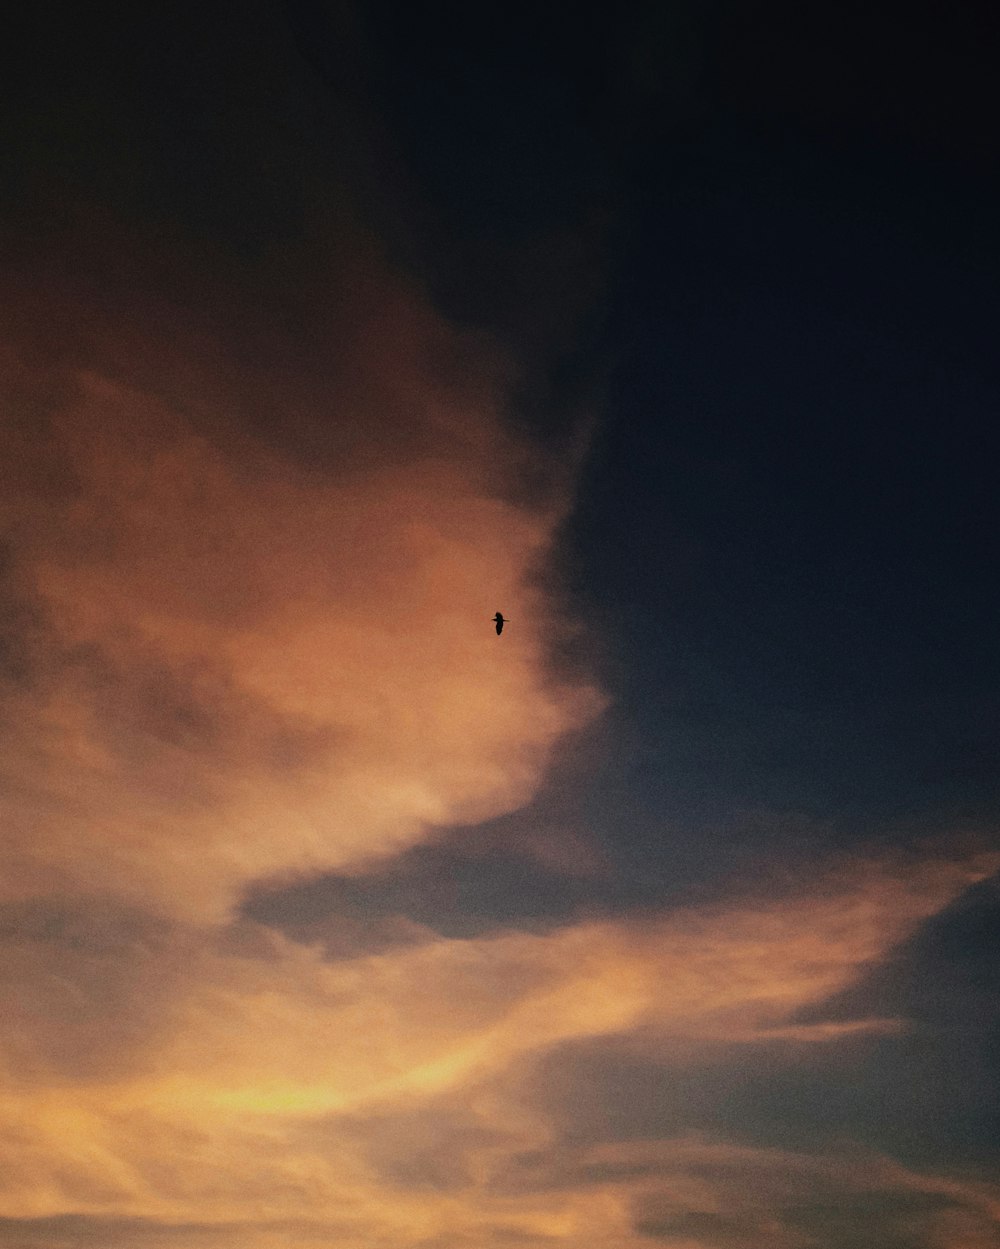 a bird flying in the sky